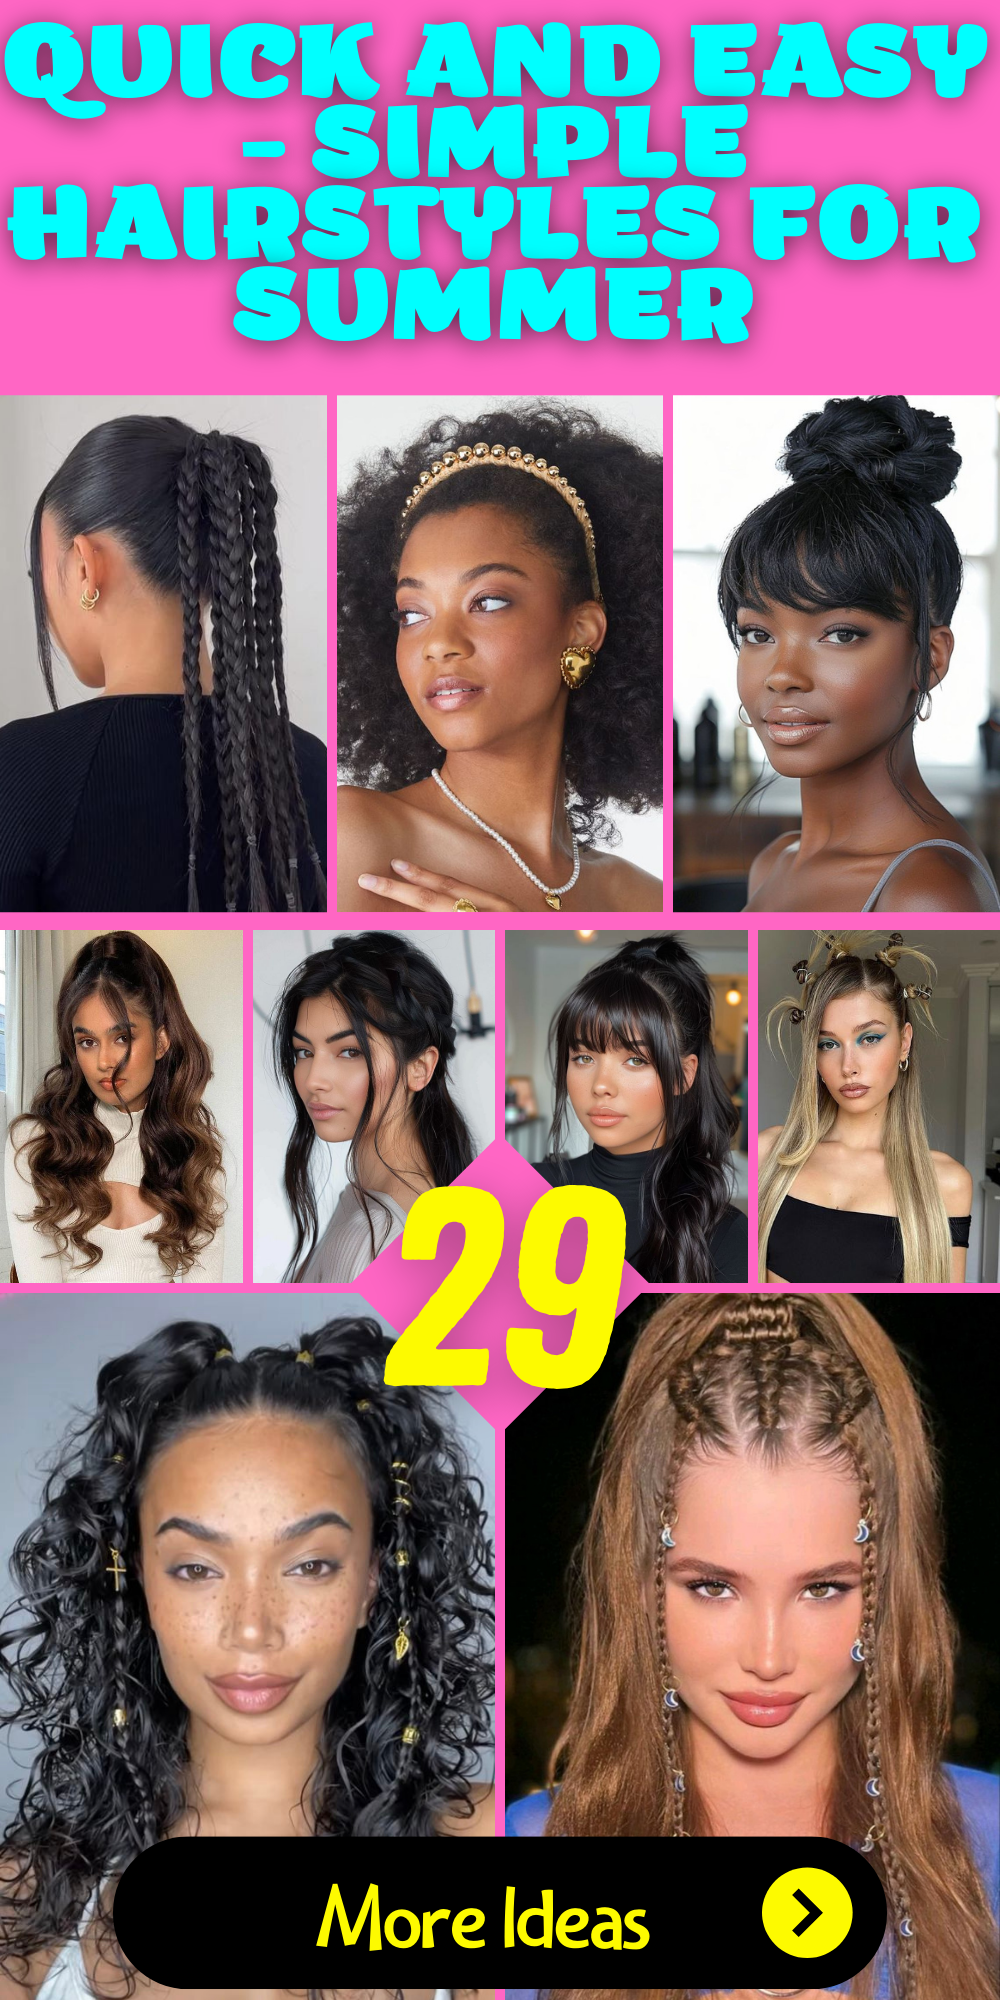 Quick and Breezy: Simple Hairstyles for Summer Days